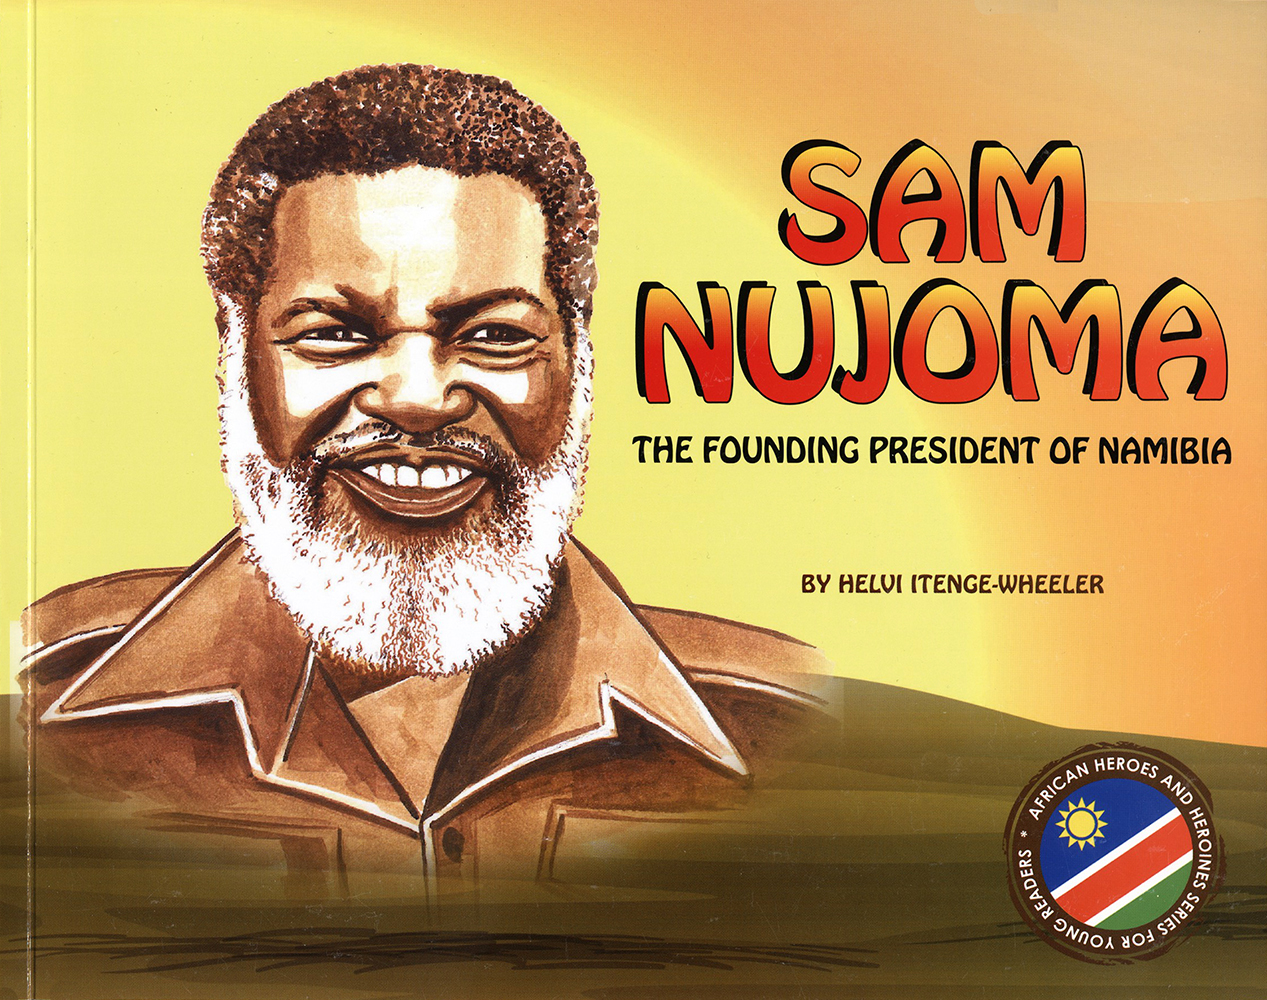 Sam Nujoma the Founding President of Namibia